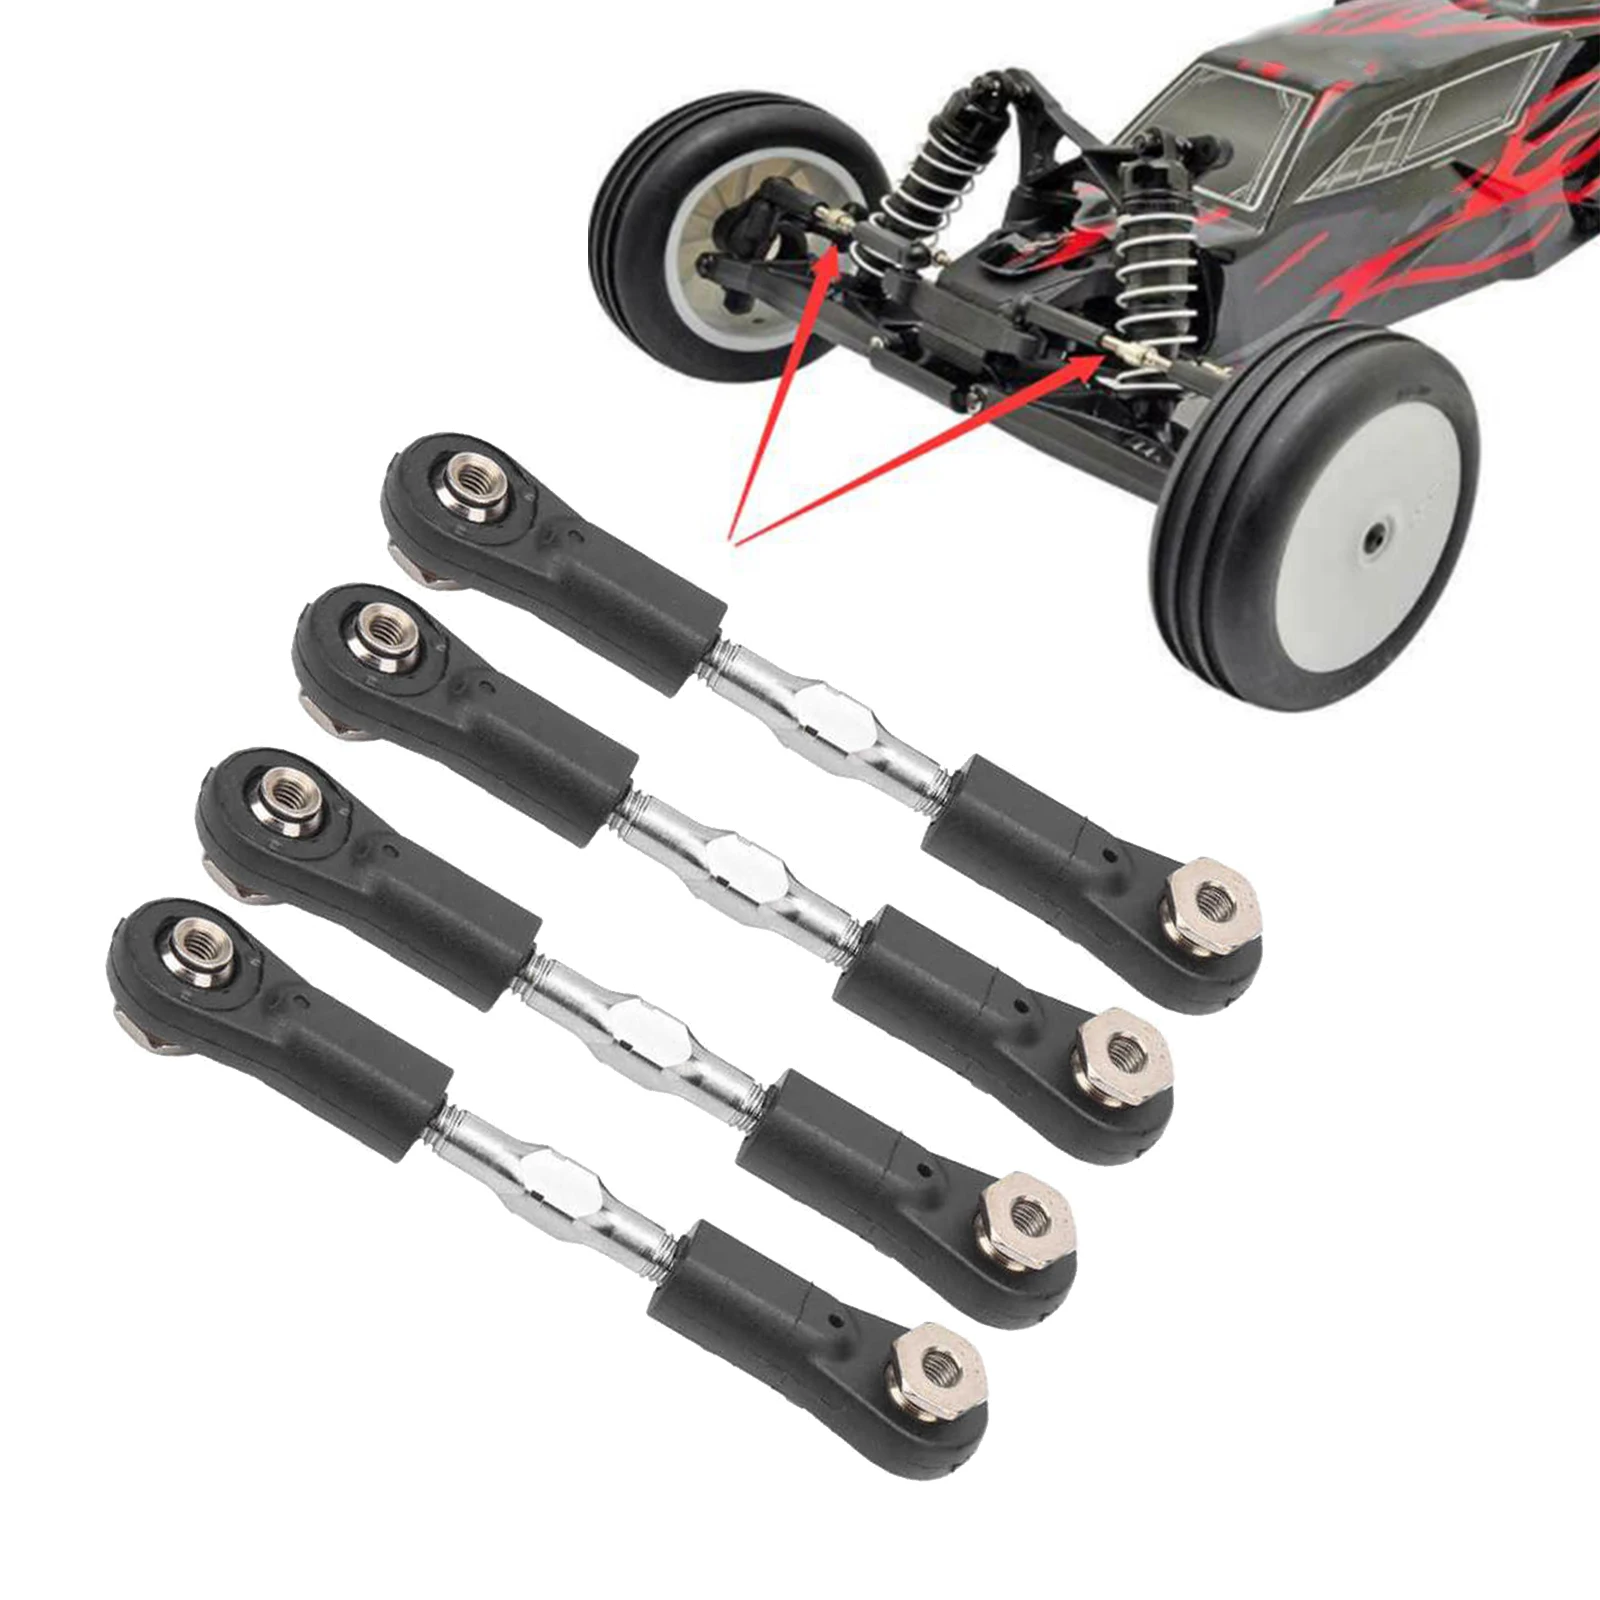 4pcs/set Metal RC Car Steering Pull Rod Servo Link for ZD Hobao 1:8 Car Buggy Model Vehicles Replacement Parts